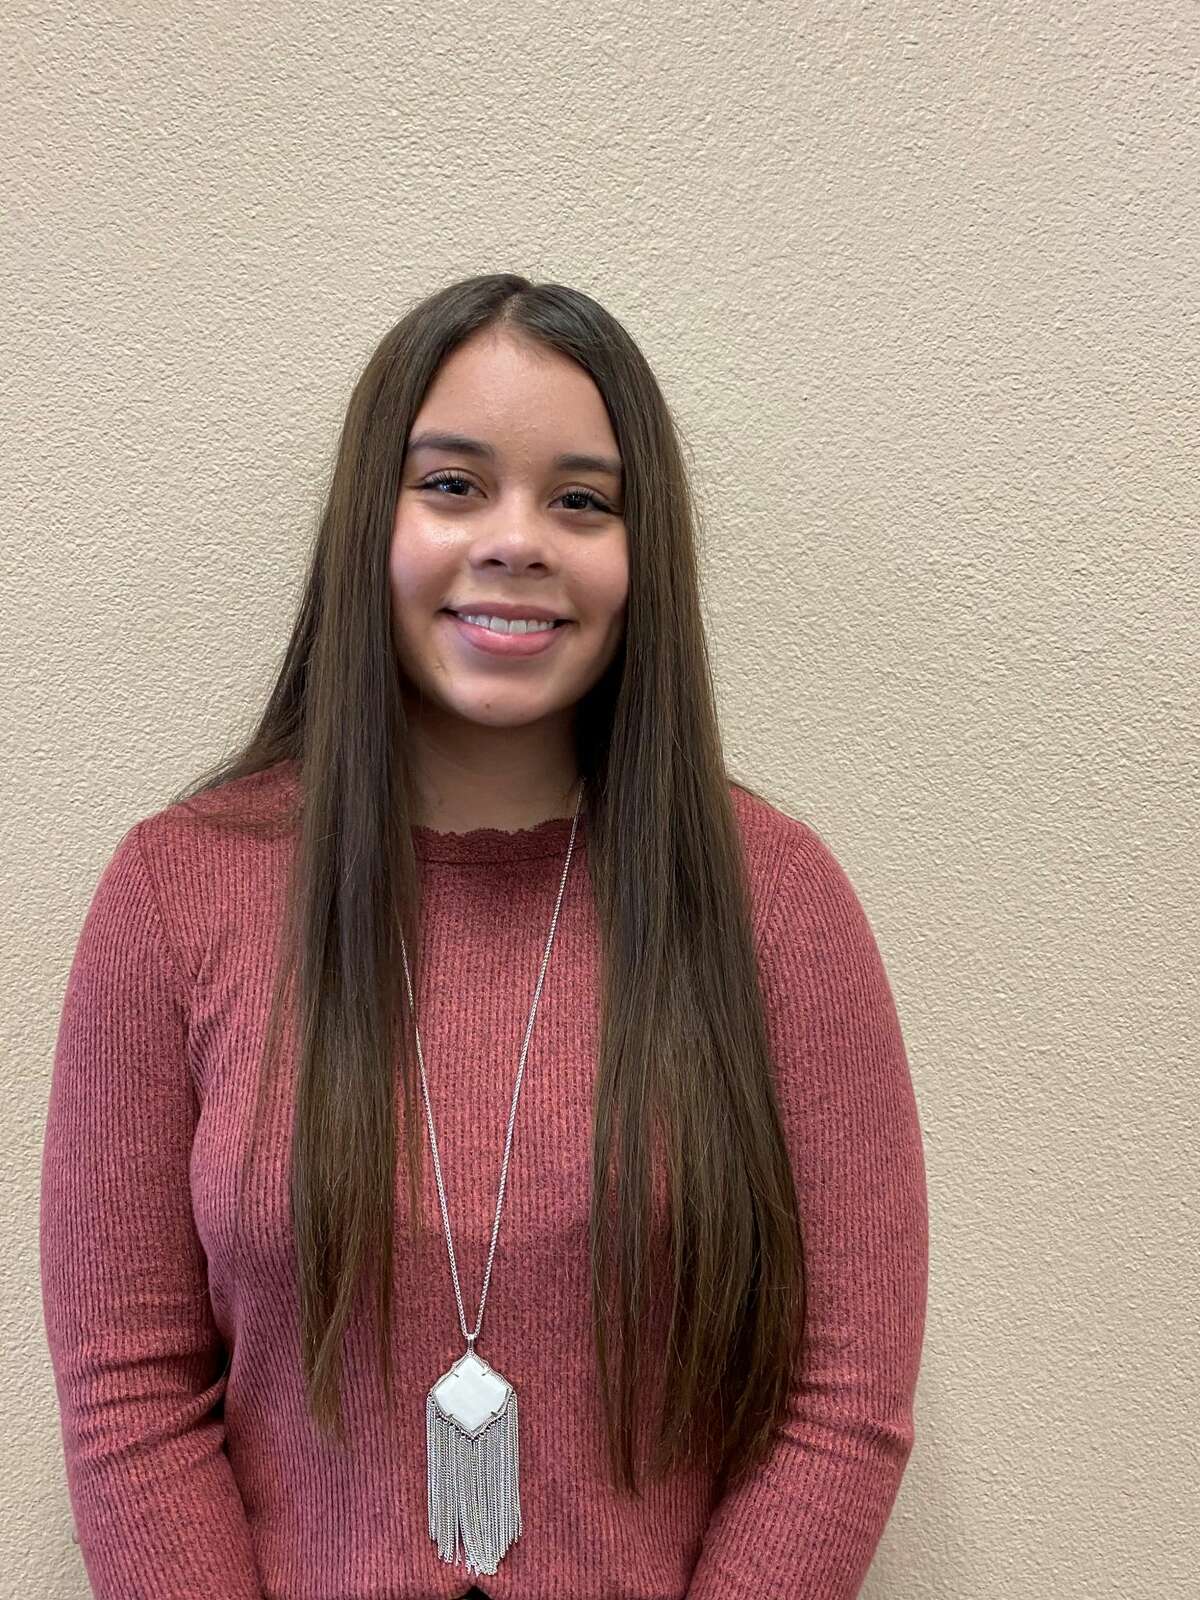 Makayla Cruz, a Plainview Christian Academy senior, was introduced as the December Student of the Month for the Plainview Rotary Club.